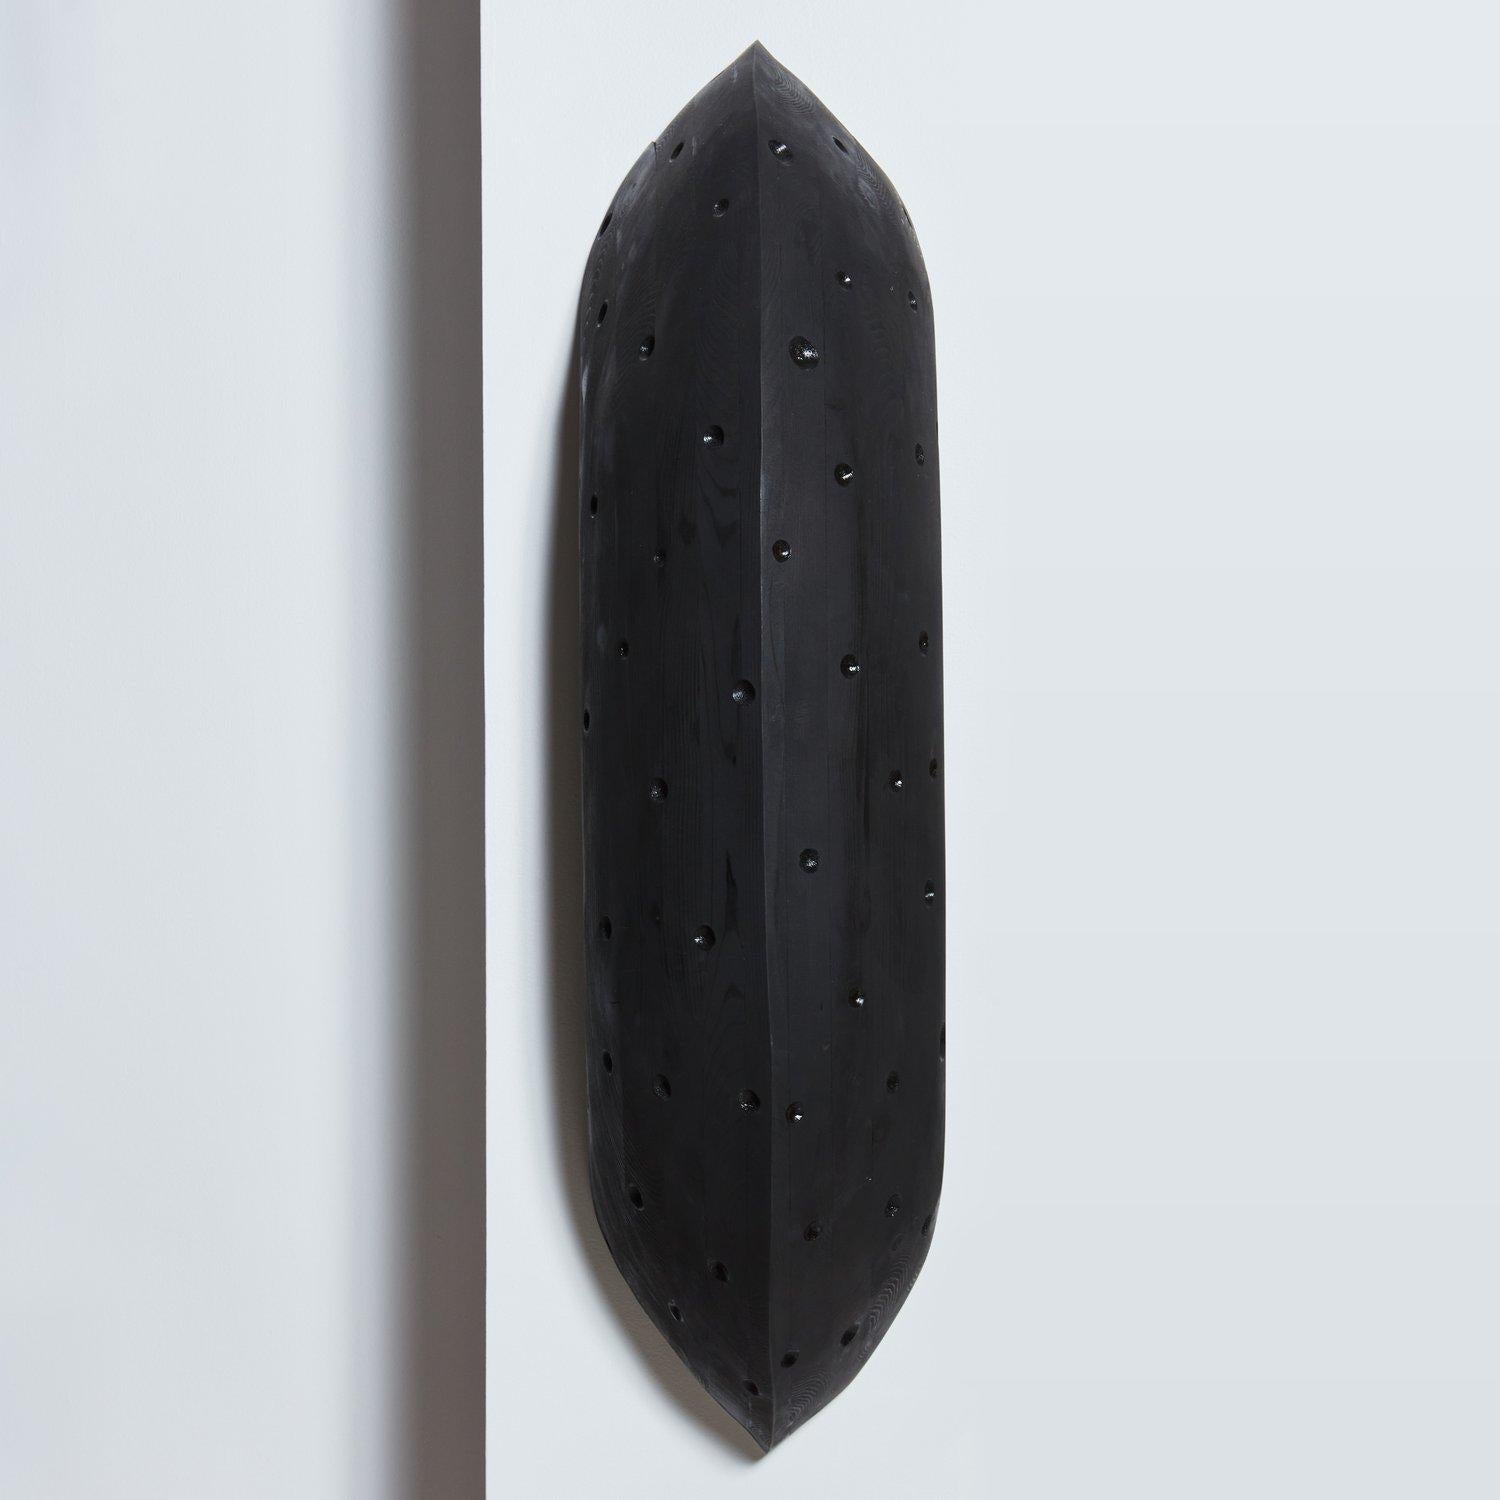 An oversized abstract wall sculpture by Canadian artist Erin Vincent. This piece was constructed with stained black natural wood and features carved dots throughout giving it a beautiful textural appeal. 

Erin Vincent is a Canadian artist who